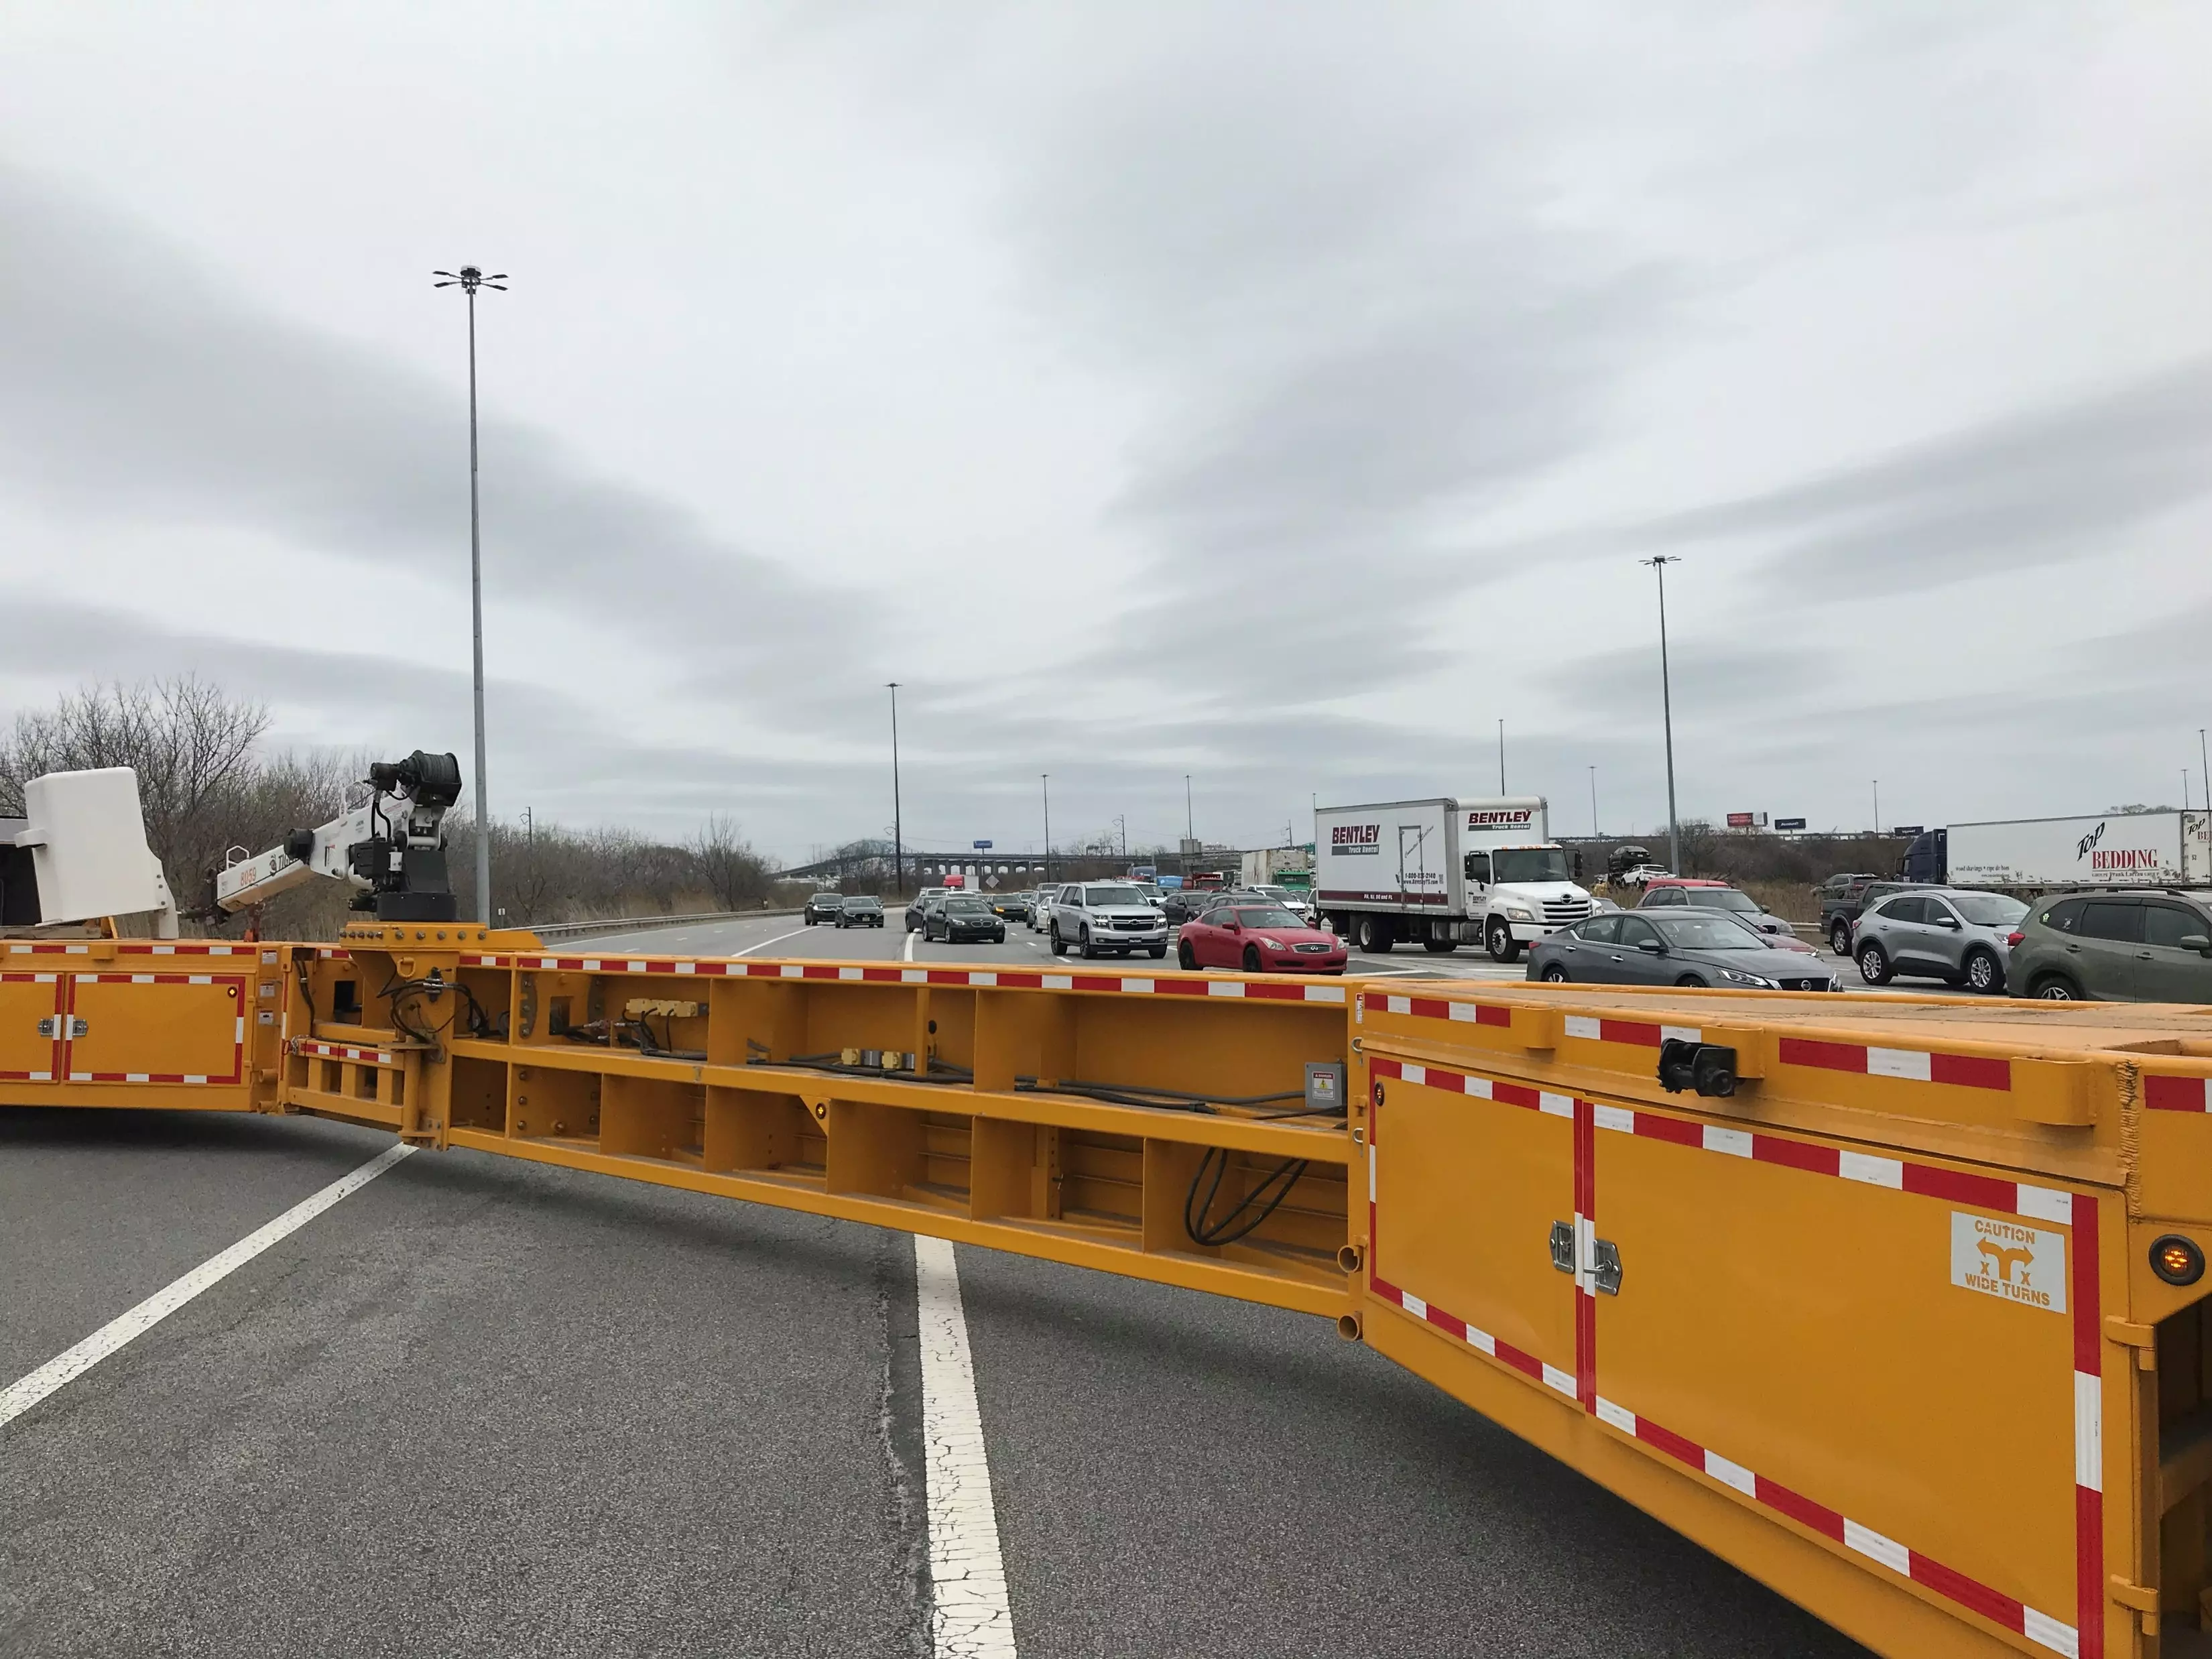 An image of a 110-foot-long yellow mobile truck barrier being used to transition traffic and protect incident management crews.